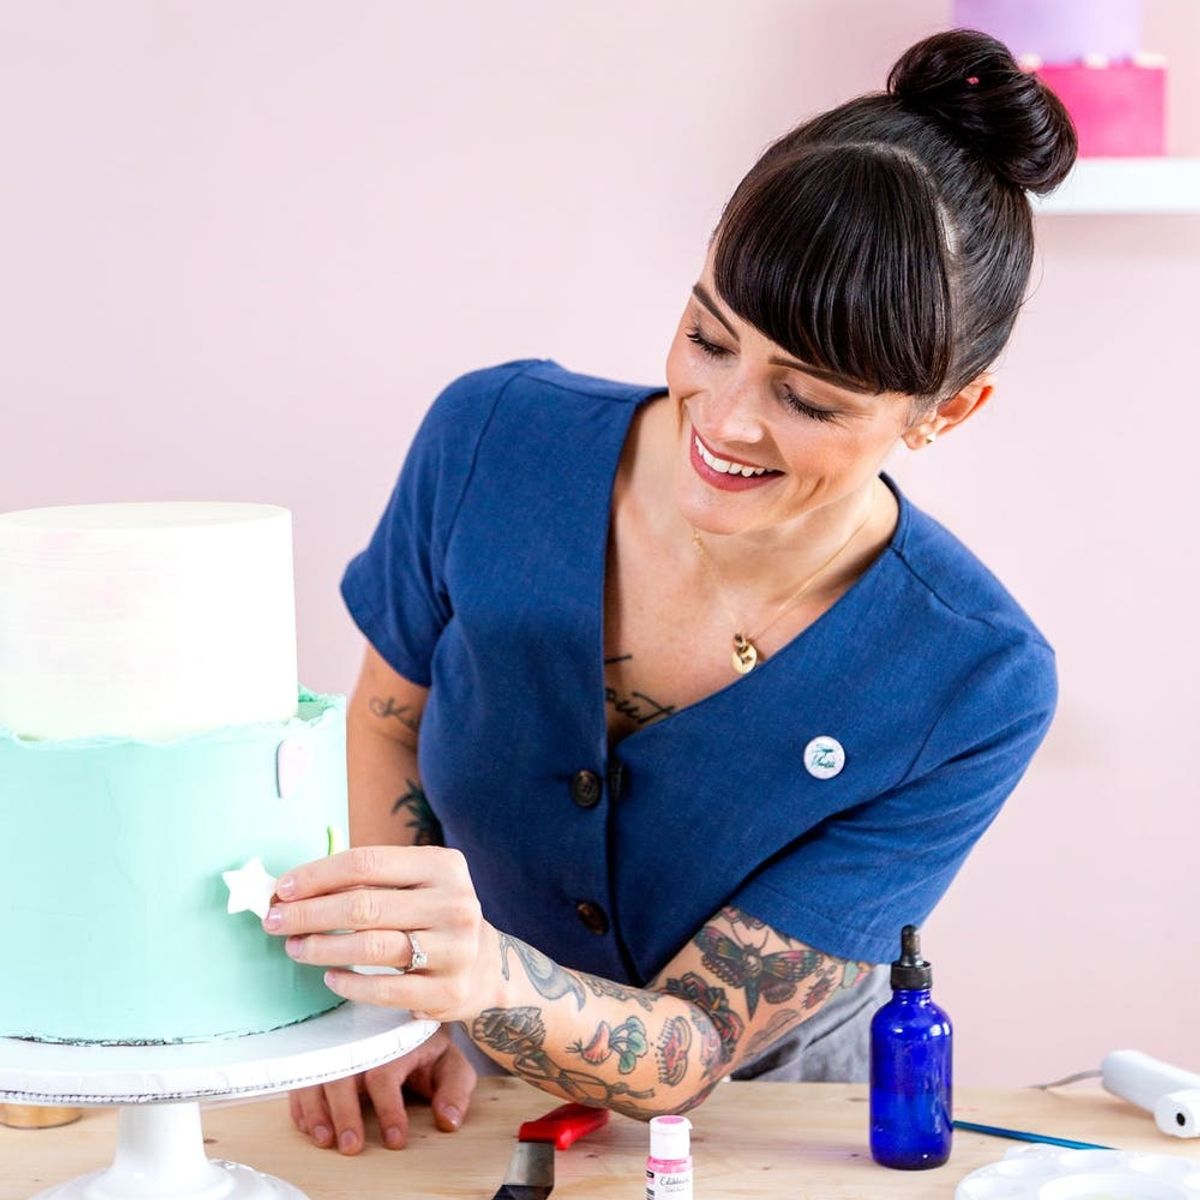 This Sugar-tastic Cake Decorating Class Will Turn Your Dessert Game *Way* Up